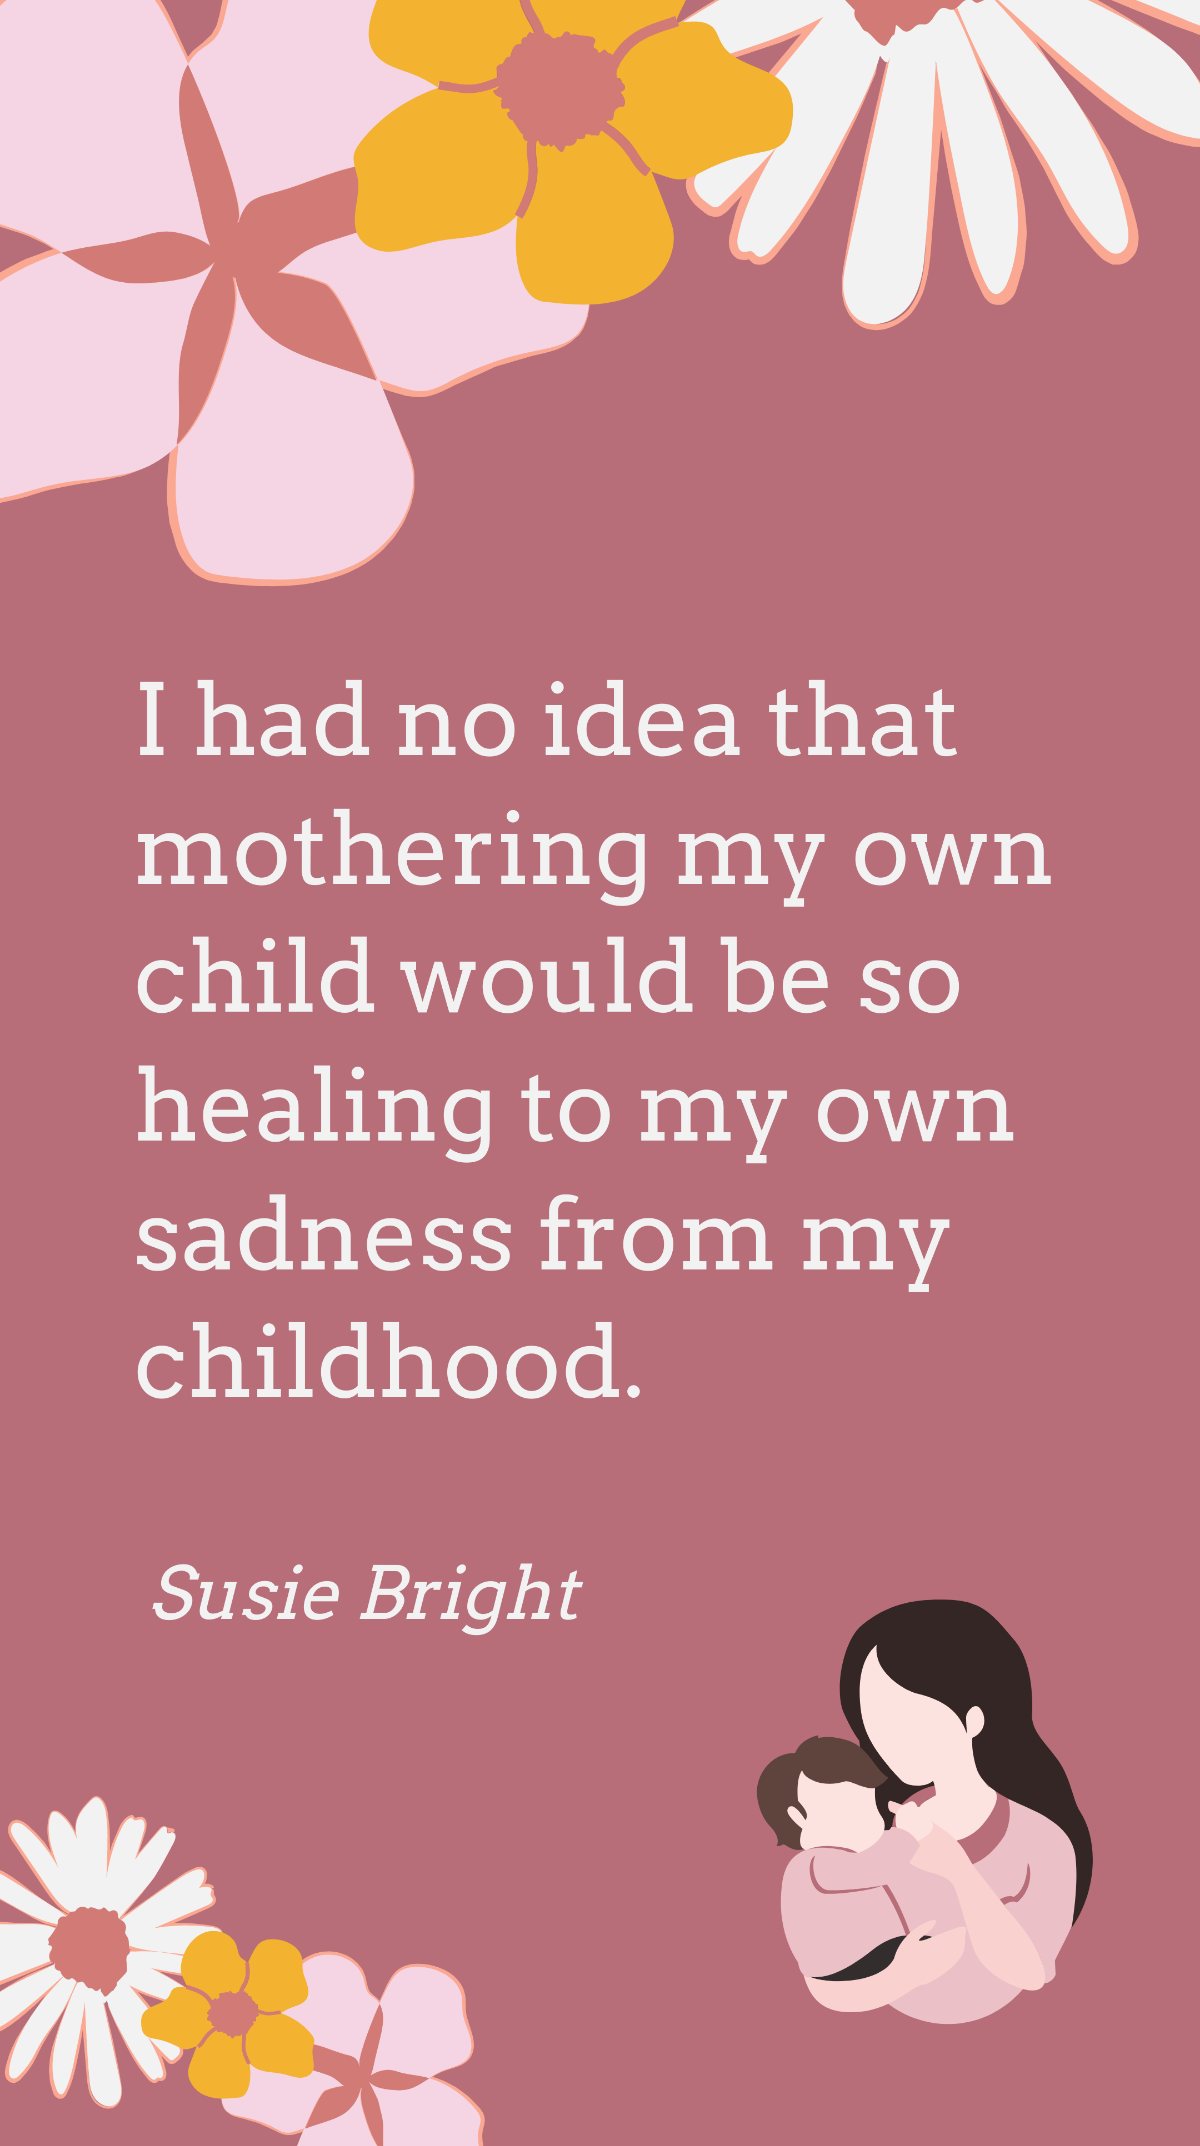 Free Susie Bright - I had no idea that mothering my own child would be so healing to my own sadness from my childhood. Template